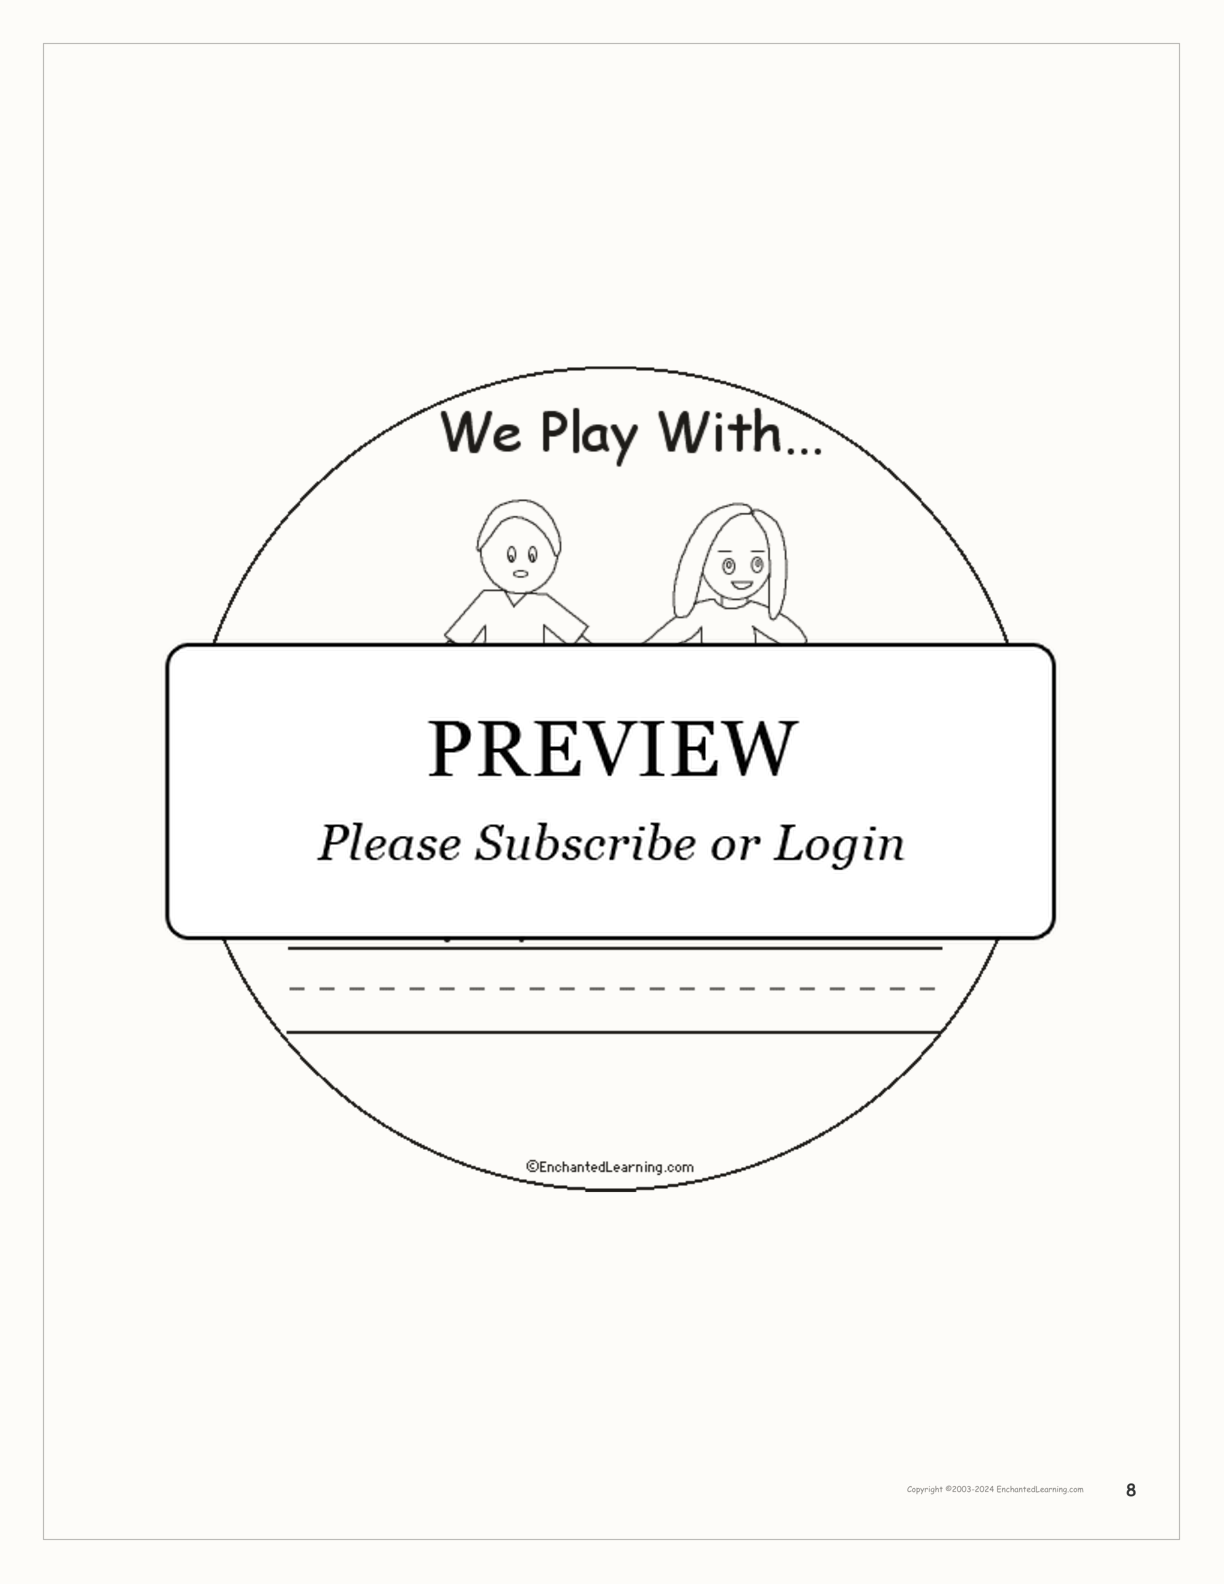 We Play With... Book interactive printout page 8